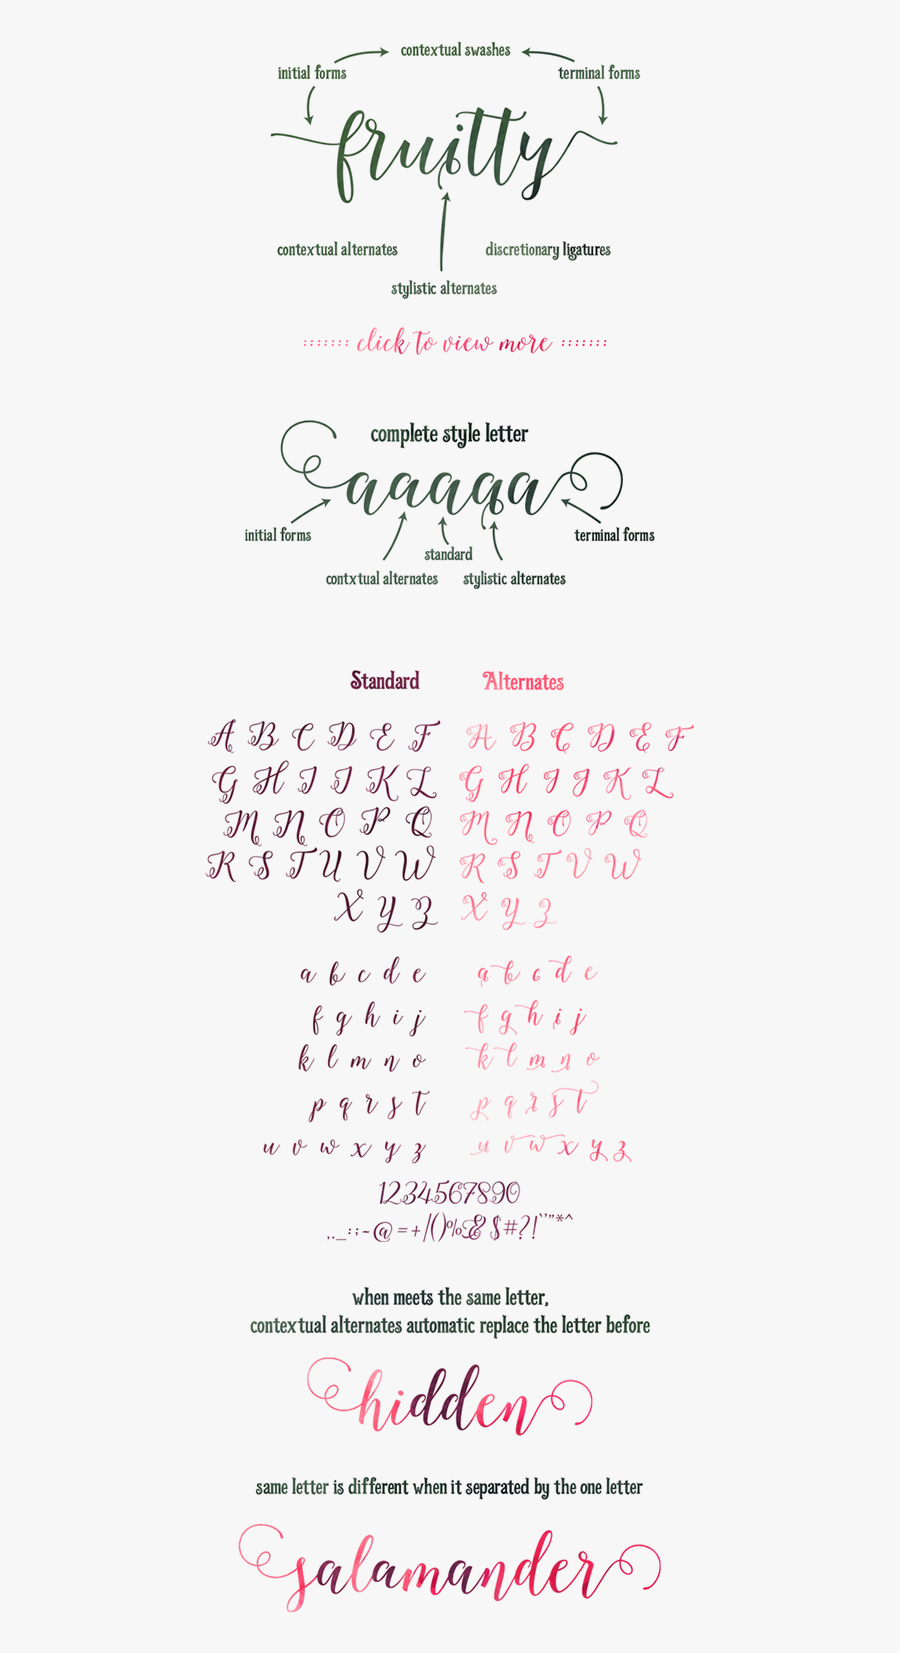 Octavia Modern Calligraphy Typefaces - Modern Vs Classic Calligraphy, Transparent Clipart